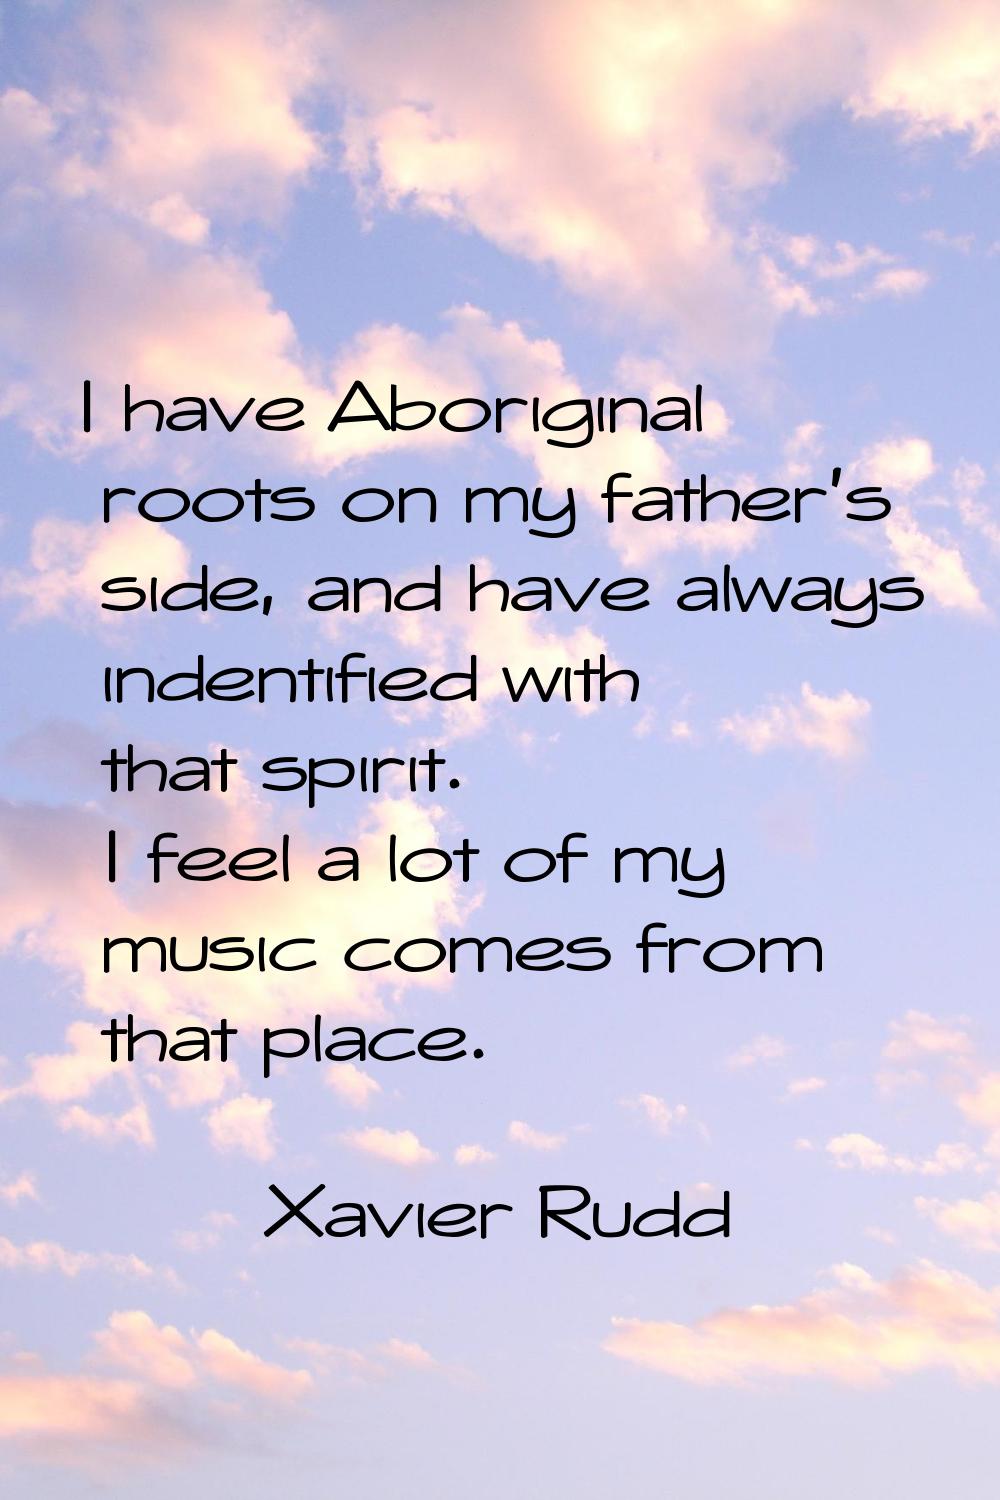 I have Aboriginal roots on my father's side, and have always indentified with that spirit. I feel a